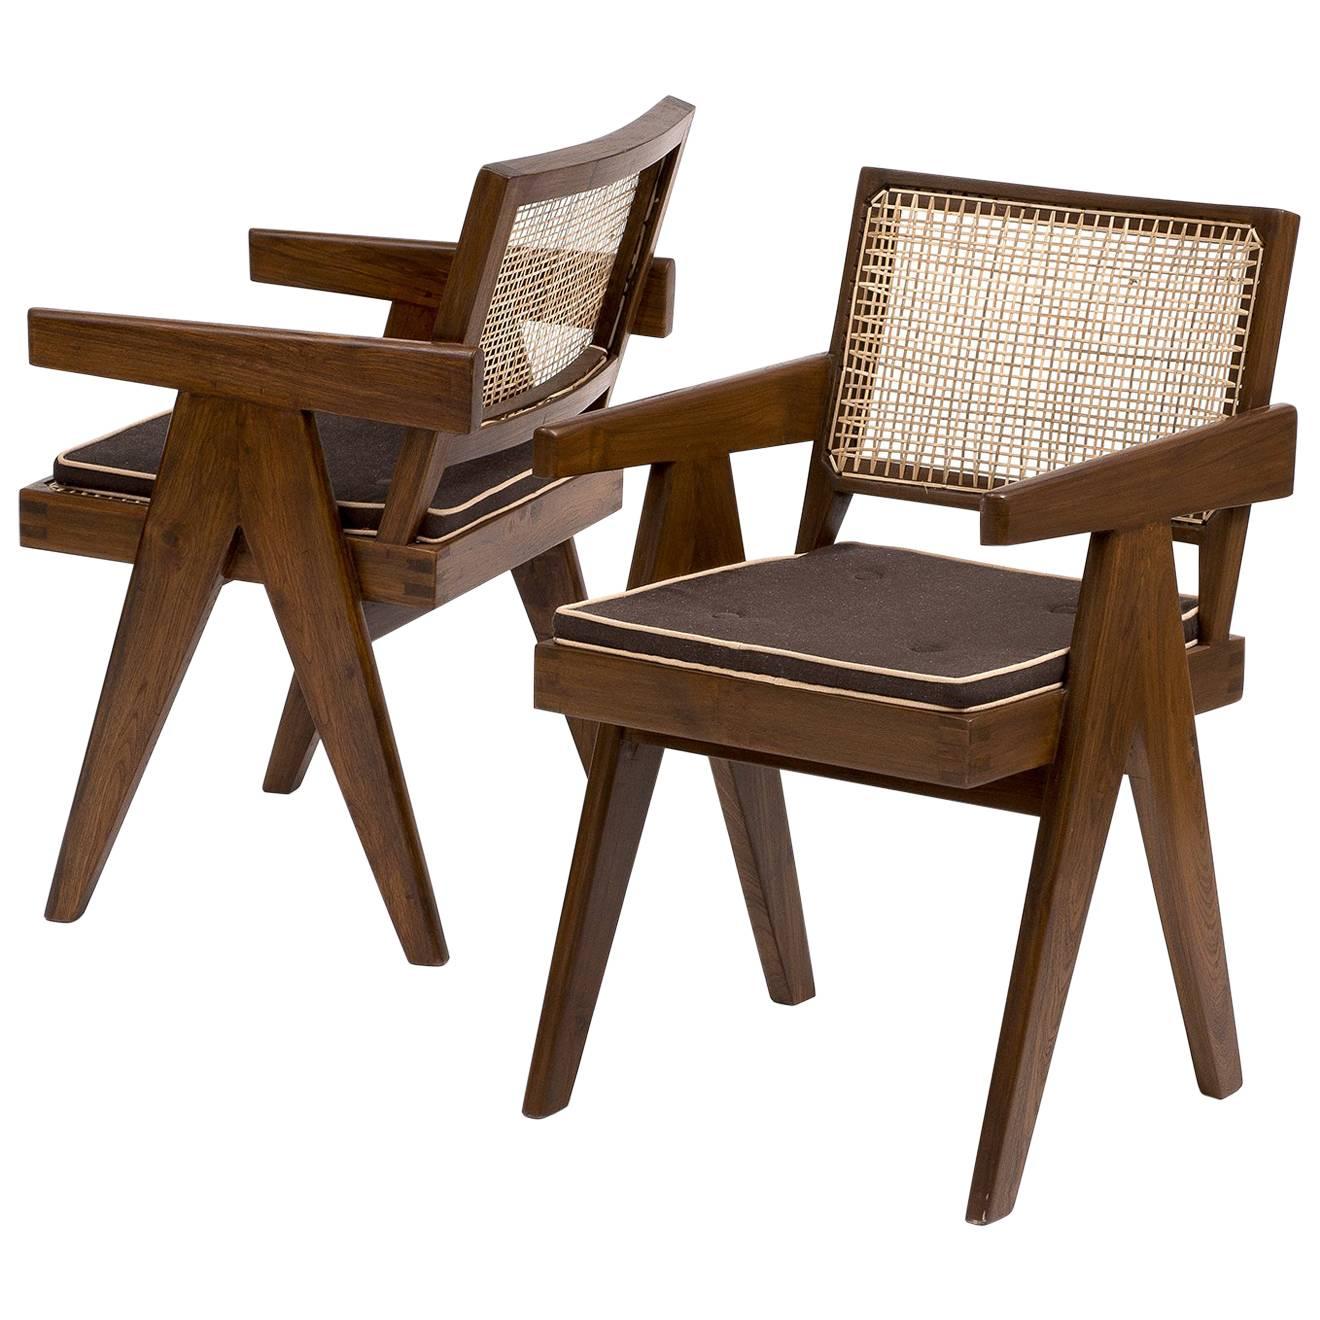 Pair of Pierre Jeanneret Armchairs in Teak and Cane for Chandigarh, 1950s